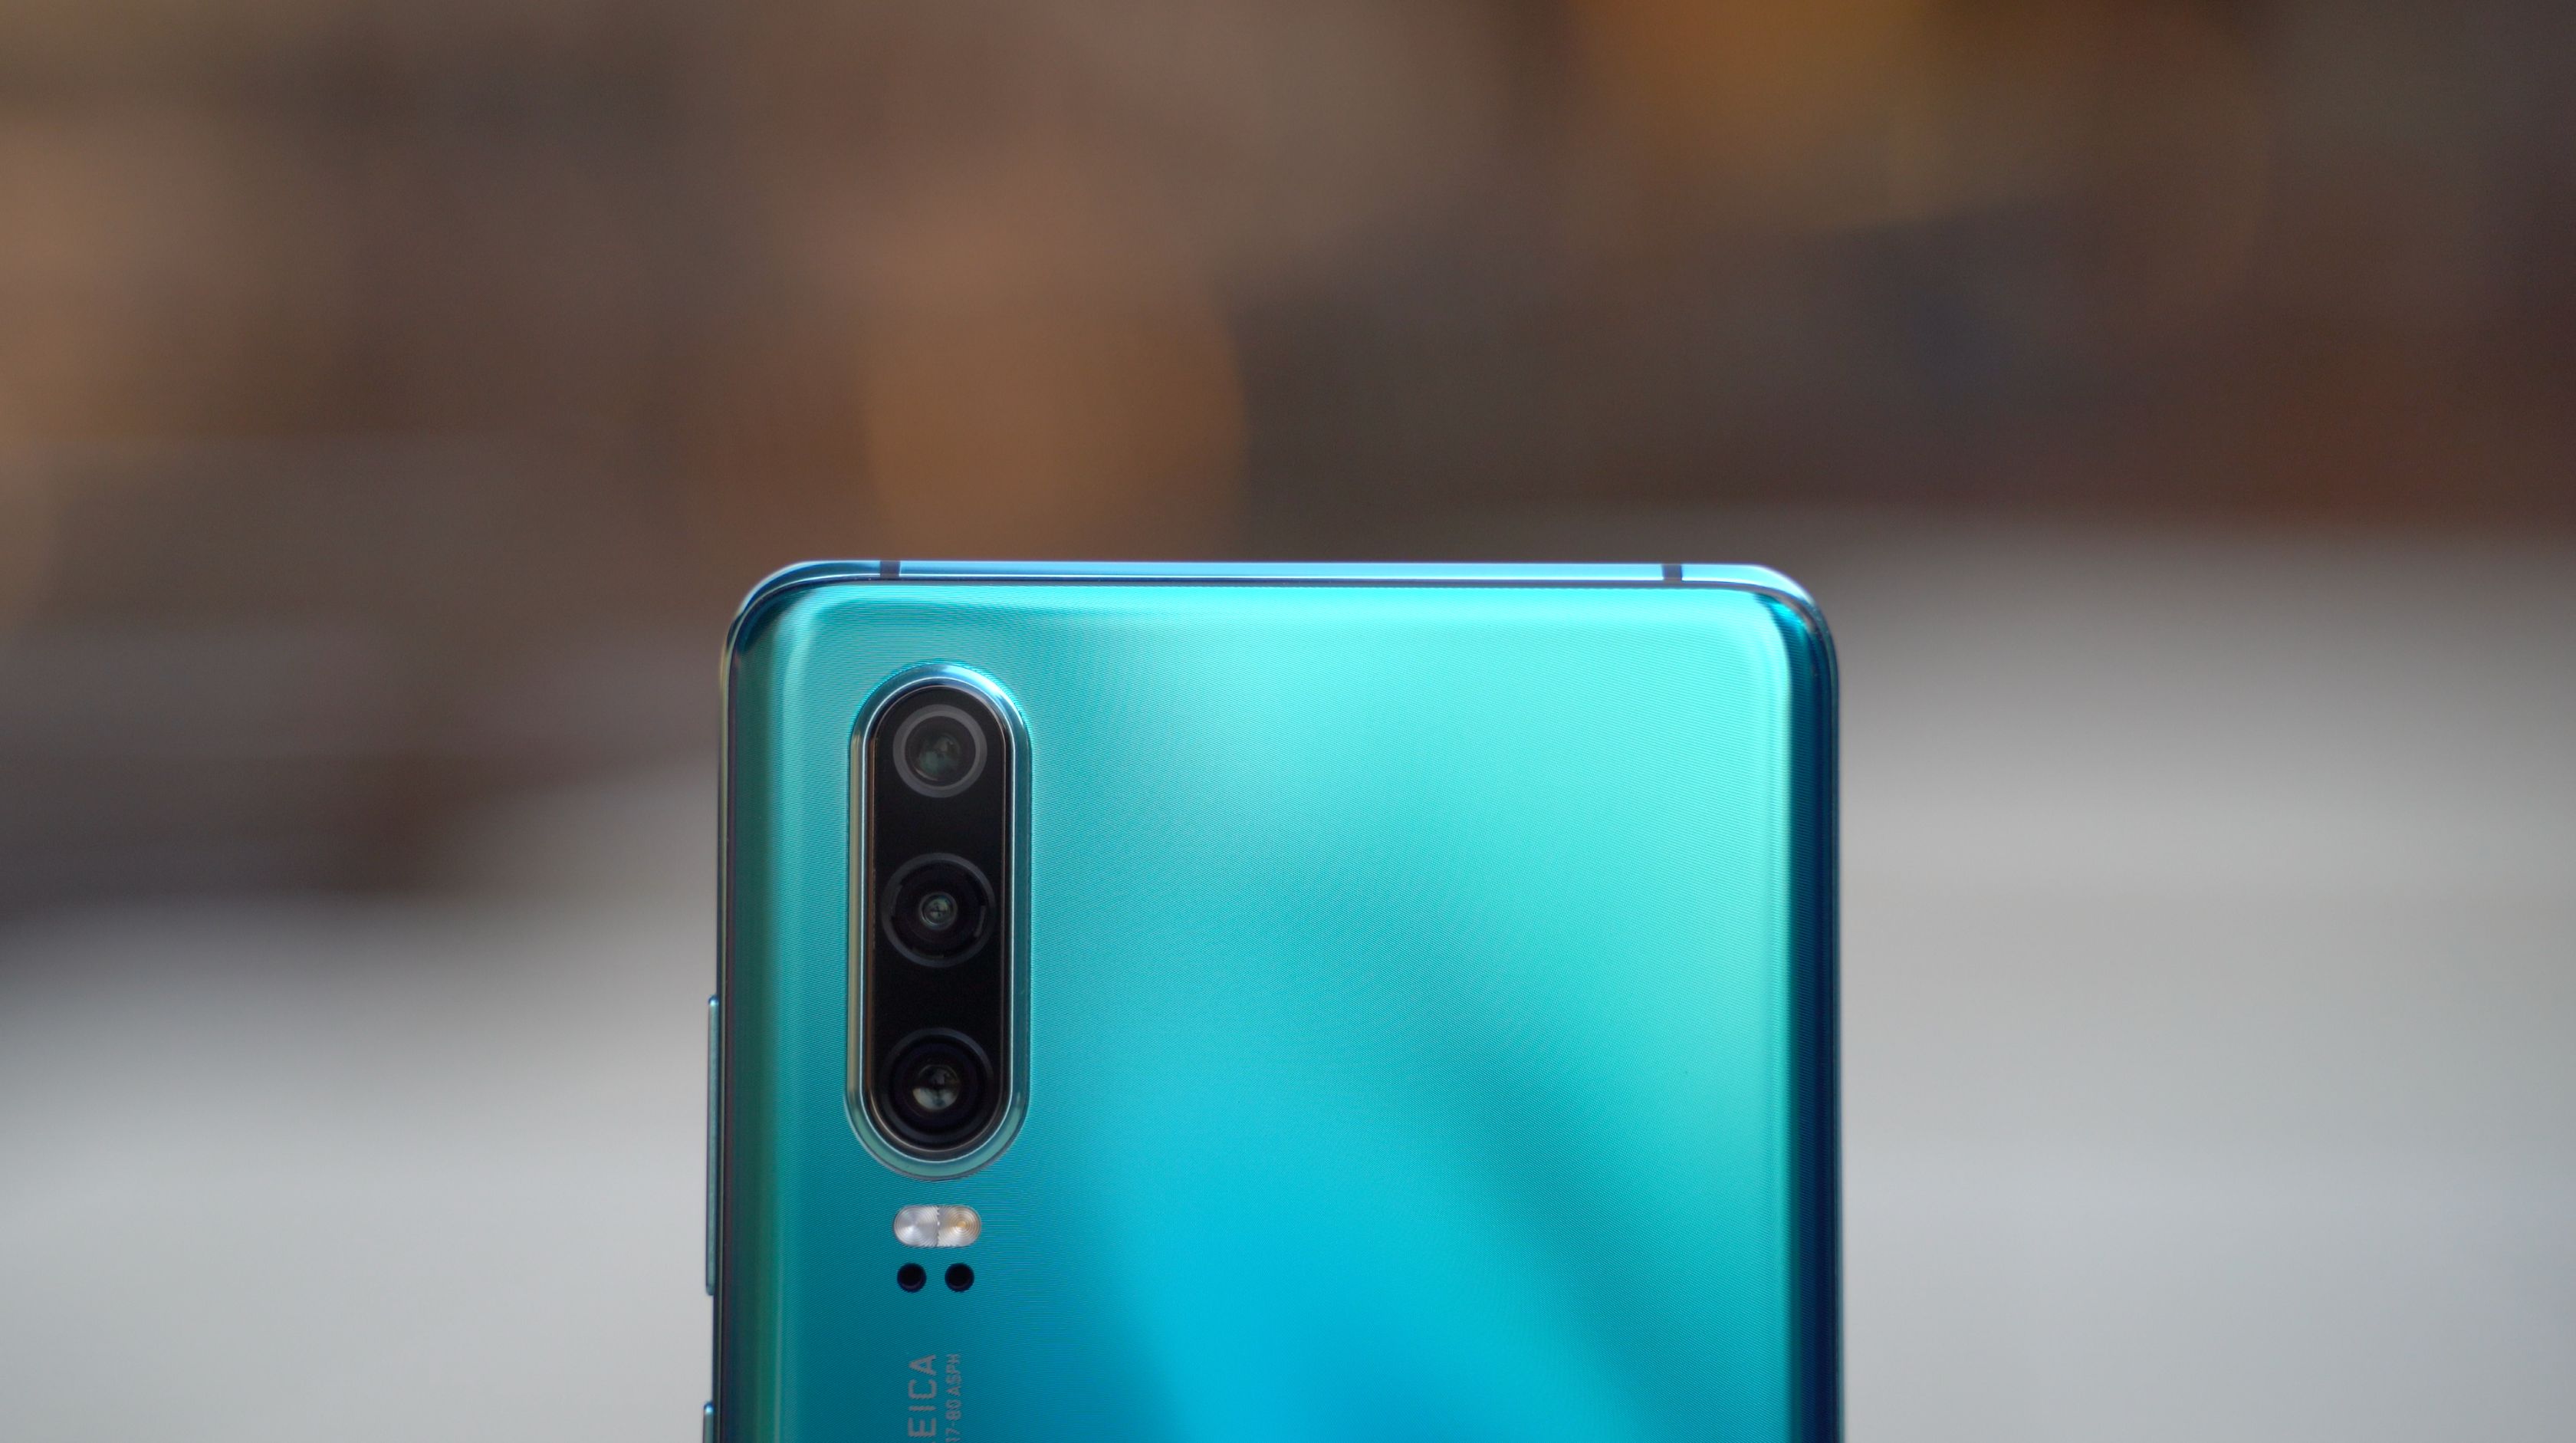 Huawei P30 Pro Review: Still the top Huawei phone to buy – here's why